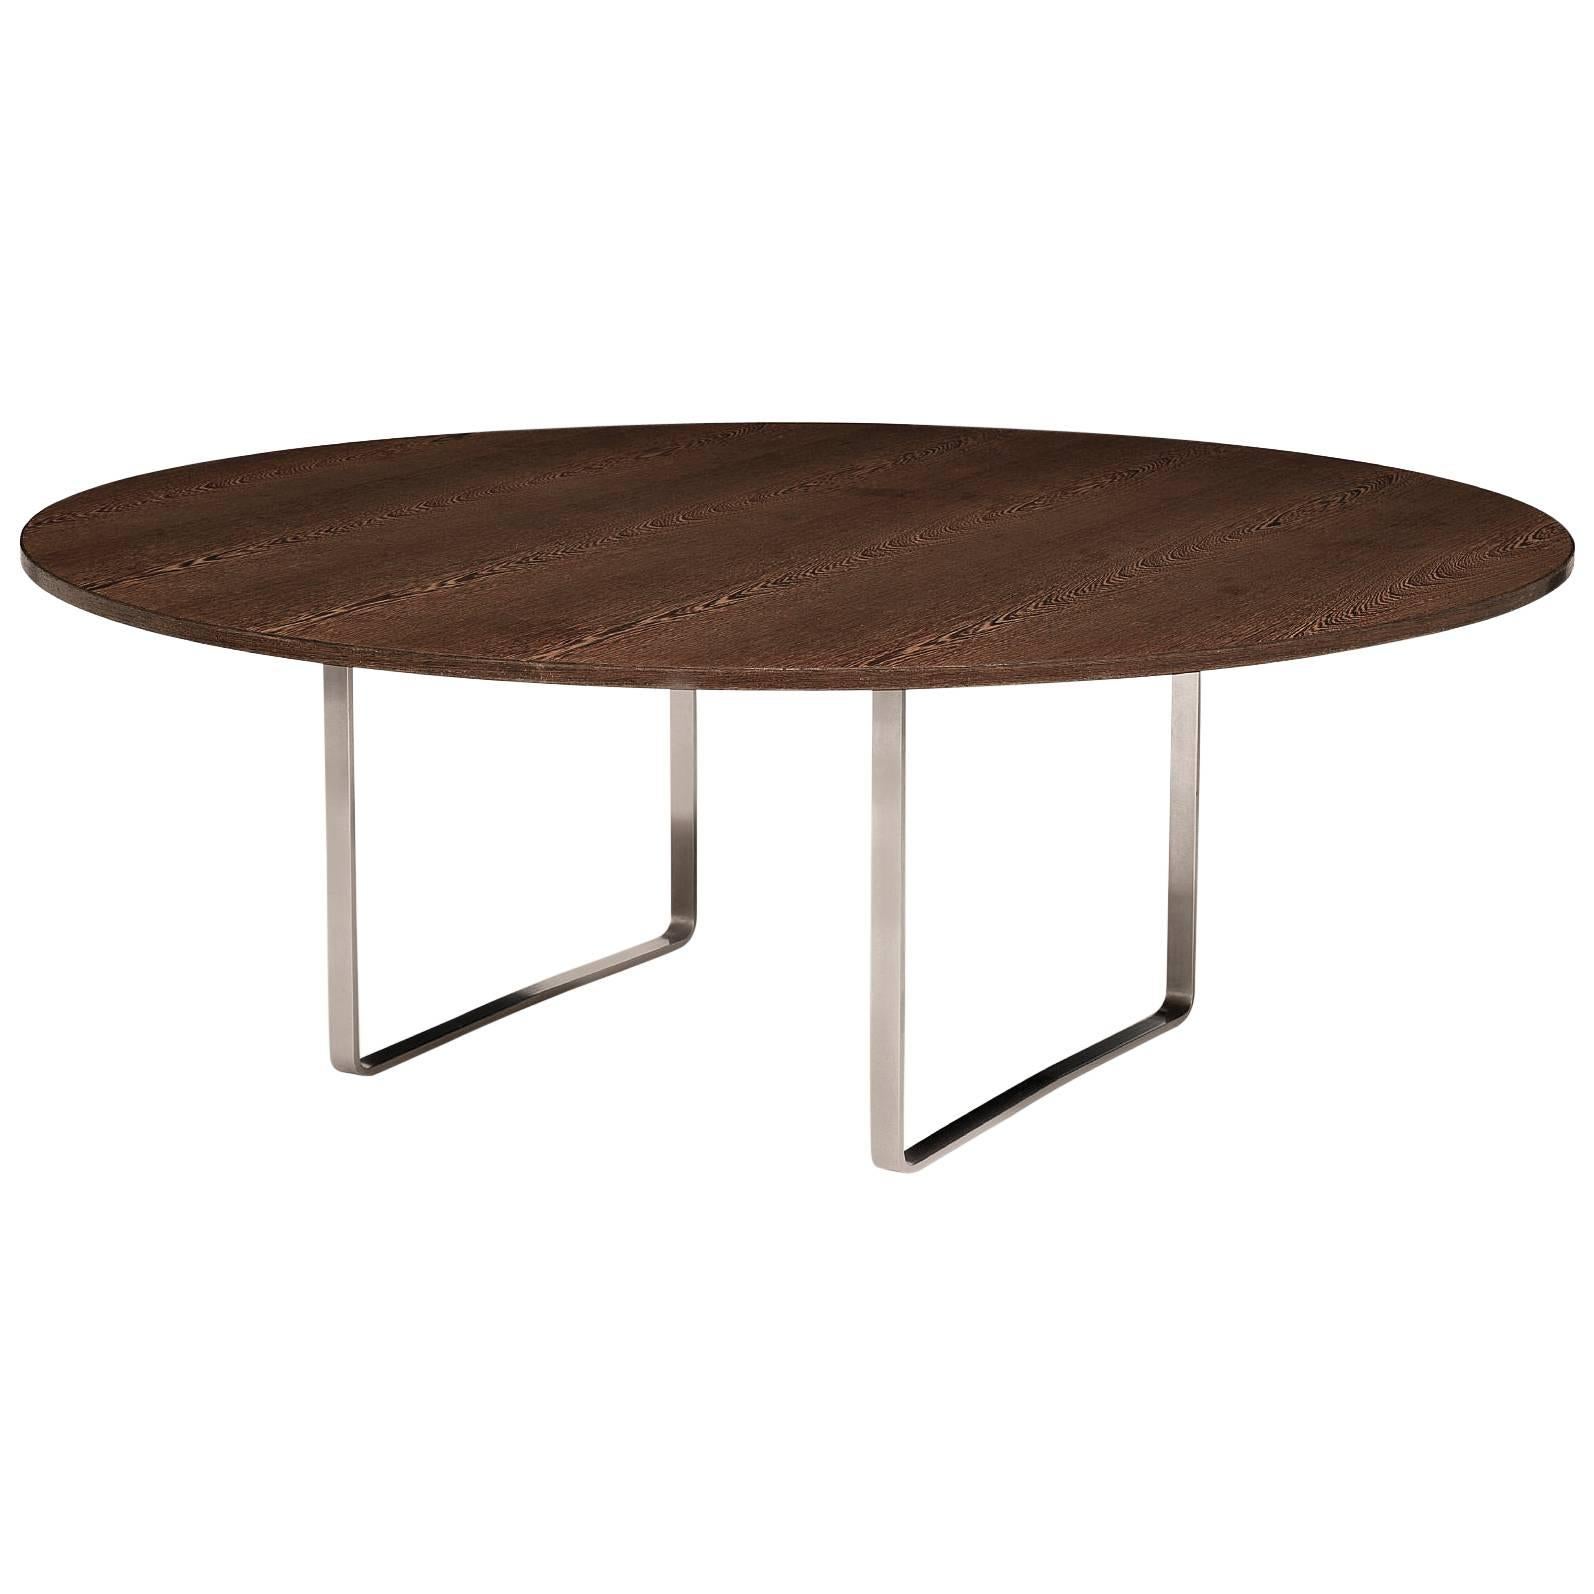 Hans Wegner's Monumental Circular Dining Table, the "JH 809", in Wengé Wood For Sale